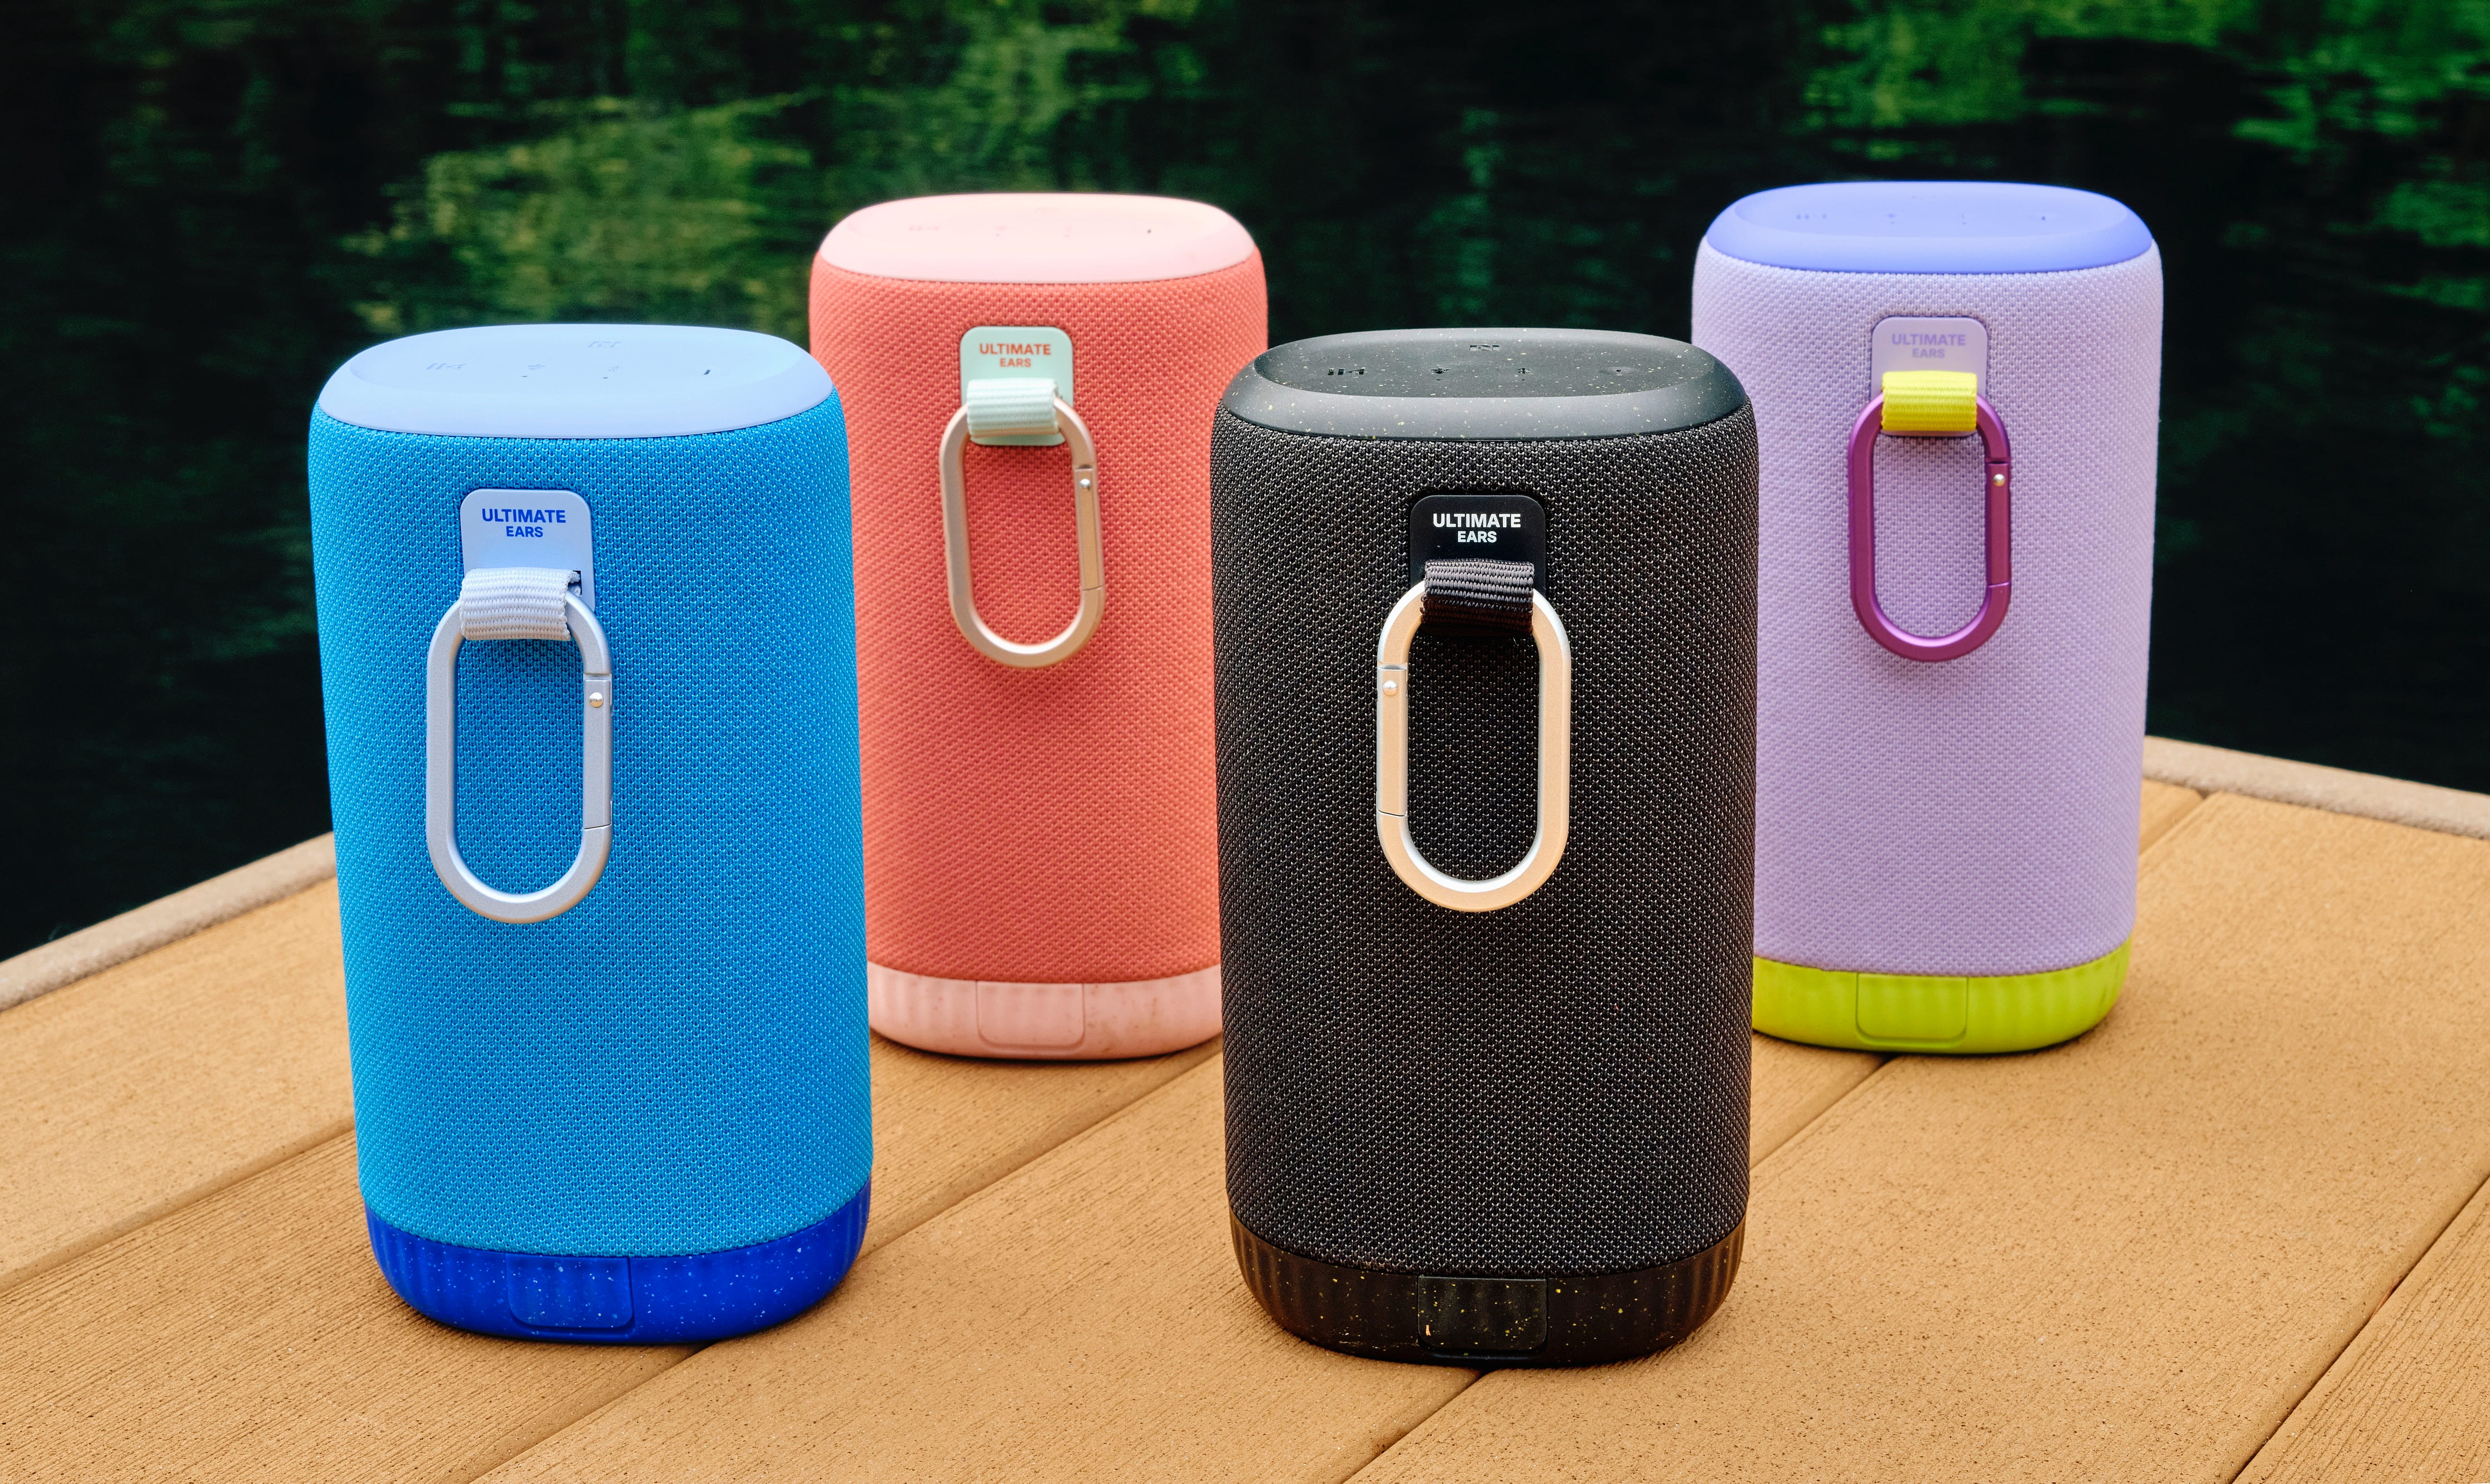 UE’s Everboom speaker is a smaller, floatable version of its Epicboom